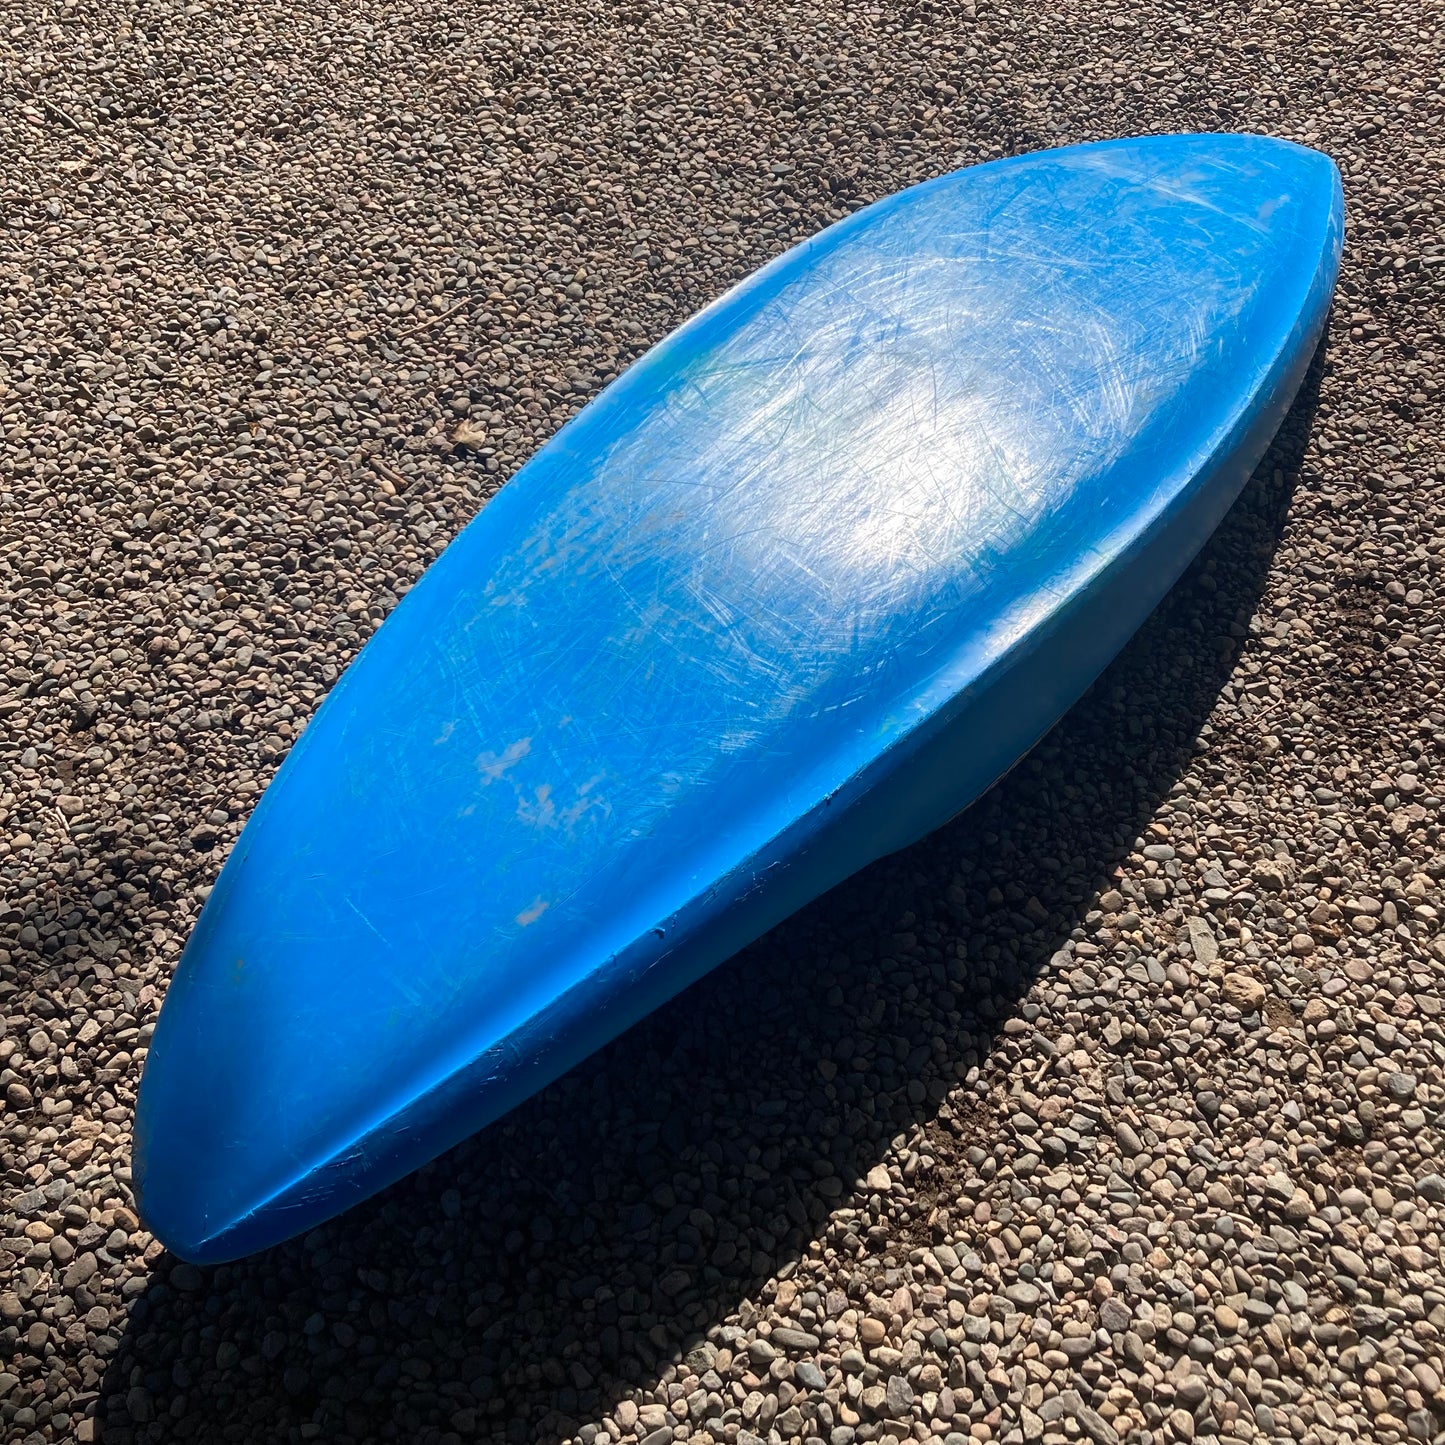 A blue Demo Supernova canoe laying on a gravel road by Dagger.